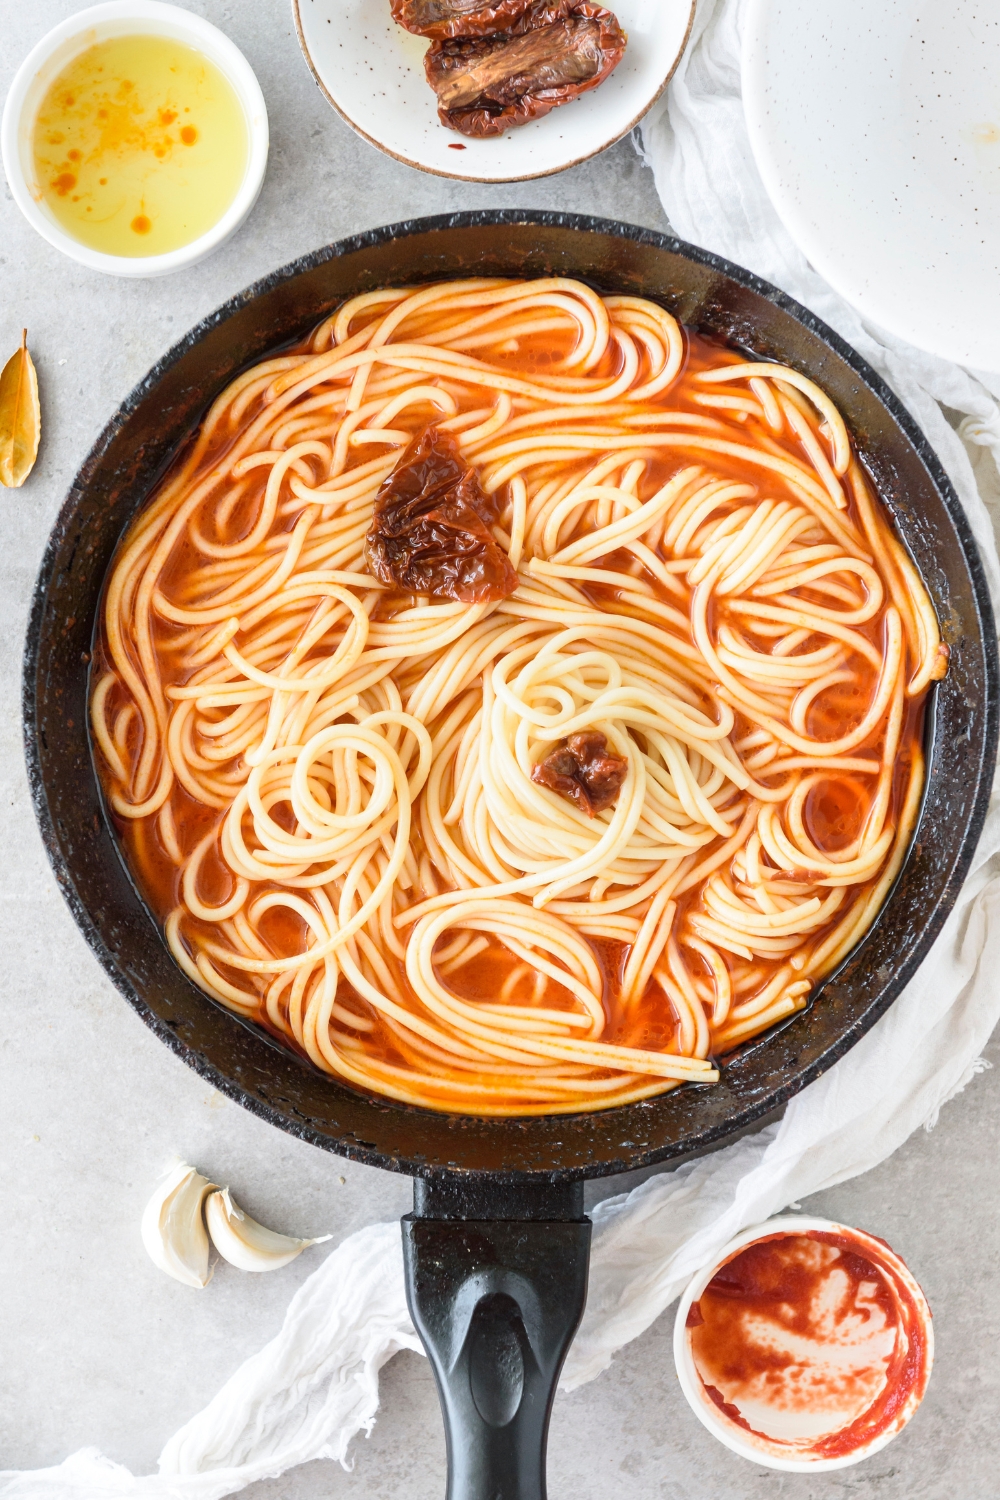 A skillet filled with spaghetti noodles in tomato sauce.